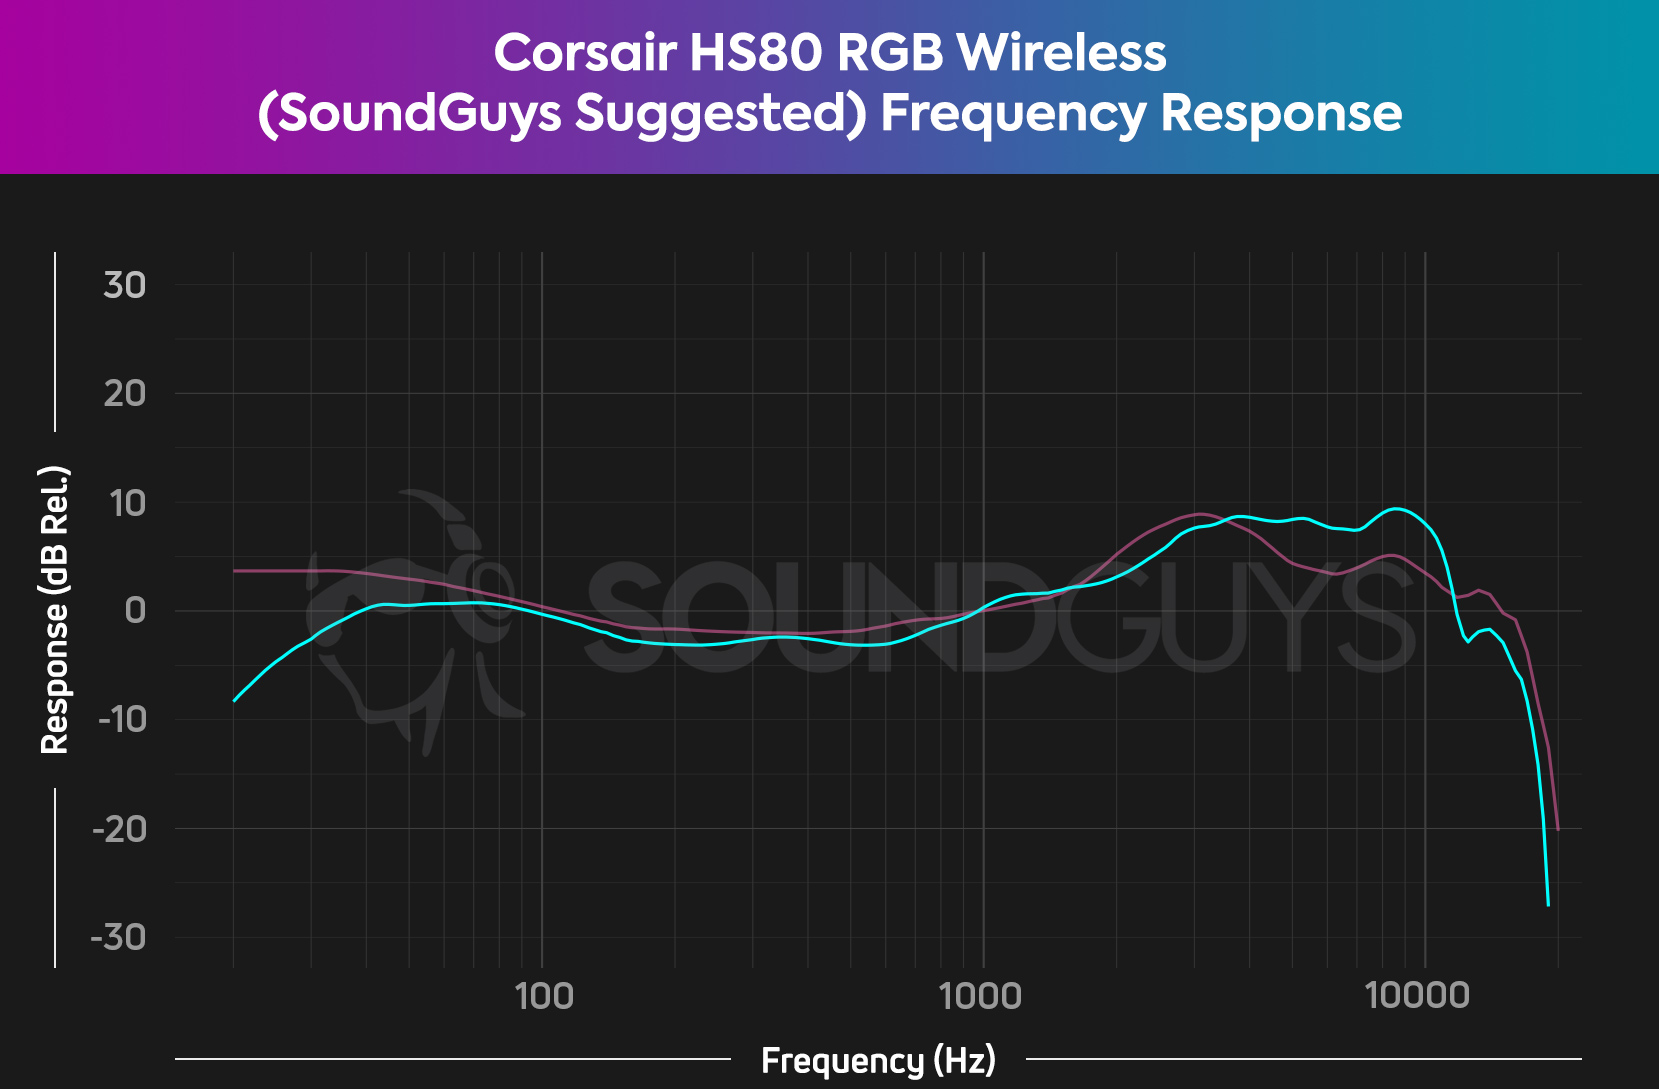 A frequency response chart for the Corsair HS80 RGB Wireless depicts how the frequency response changes when the SoundGuys suggested EQ is applied.